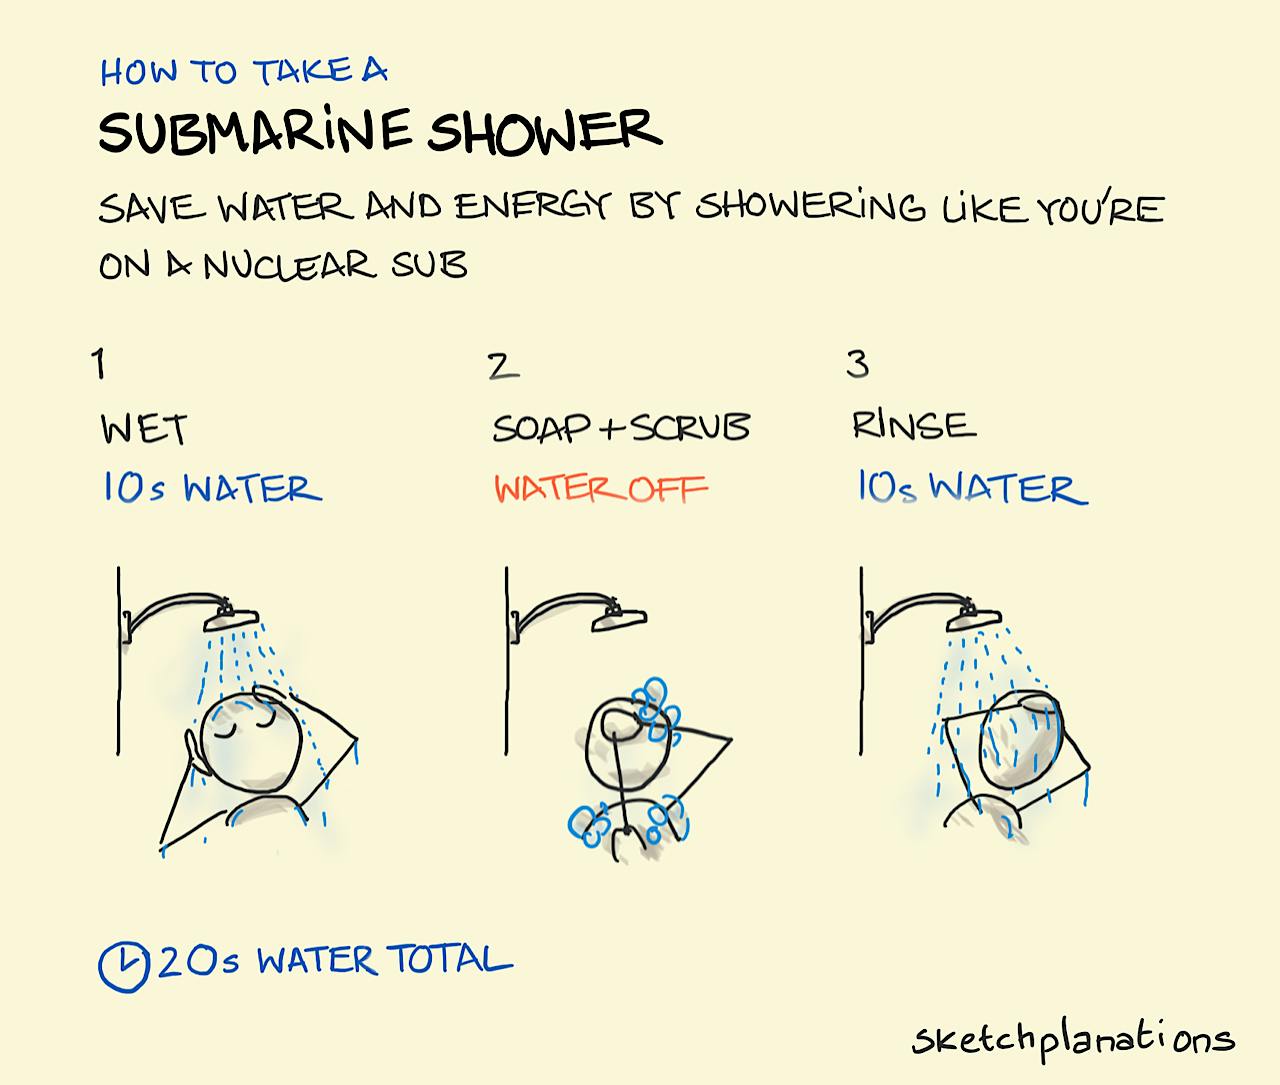 Submarine shower illustration: following these 3 simple steps, we can save water and energy by showering as if there was a very limited supply of water - like on a nuclear submarine. Firstly, the shower-goer wets their entire body using only 10 seconds of water. Secondly, the shower has been turned off for soap or shower gel to be applied and lathered up. Thirdly, the water is turned back on again for a thorough but quick rinsing - again only using 10 seconds worth of water. Job done. Little water used.  